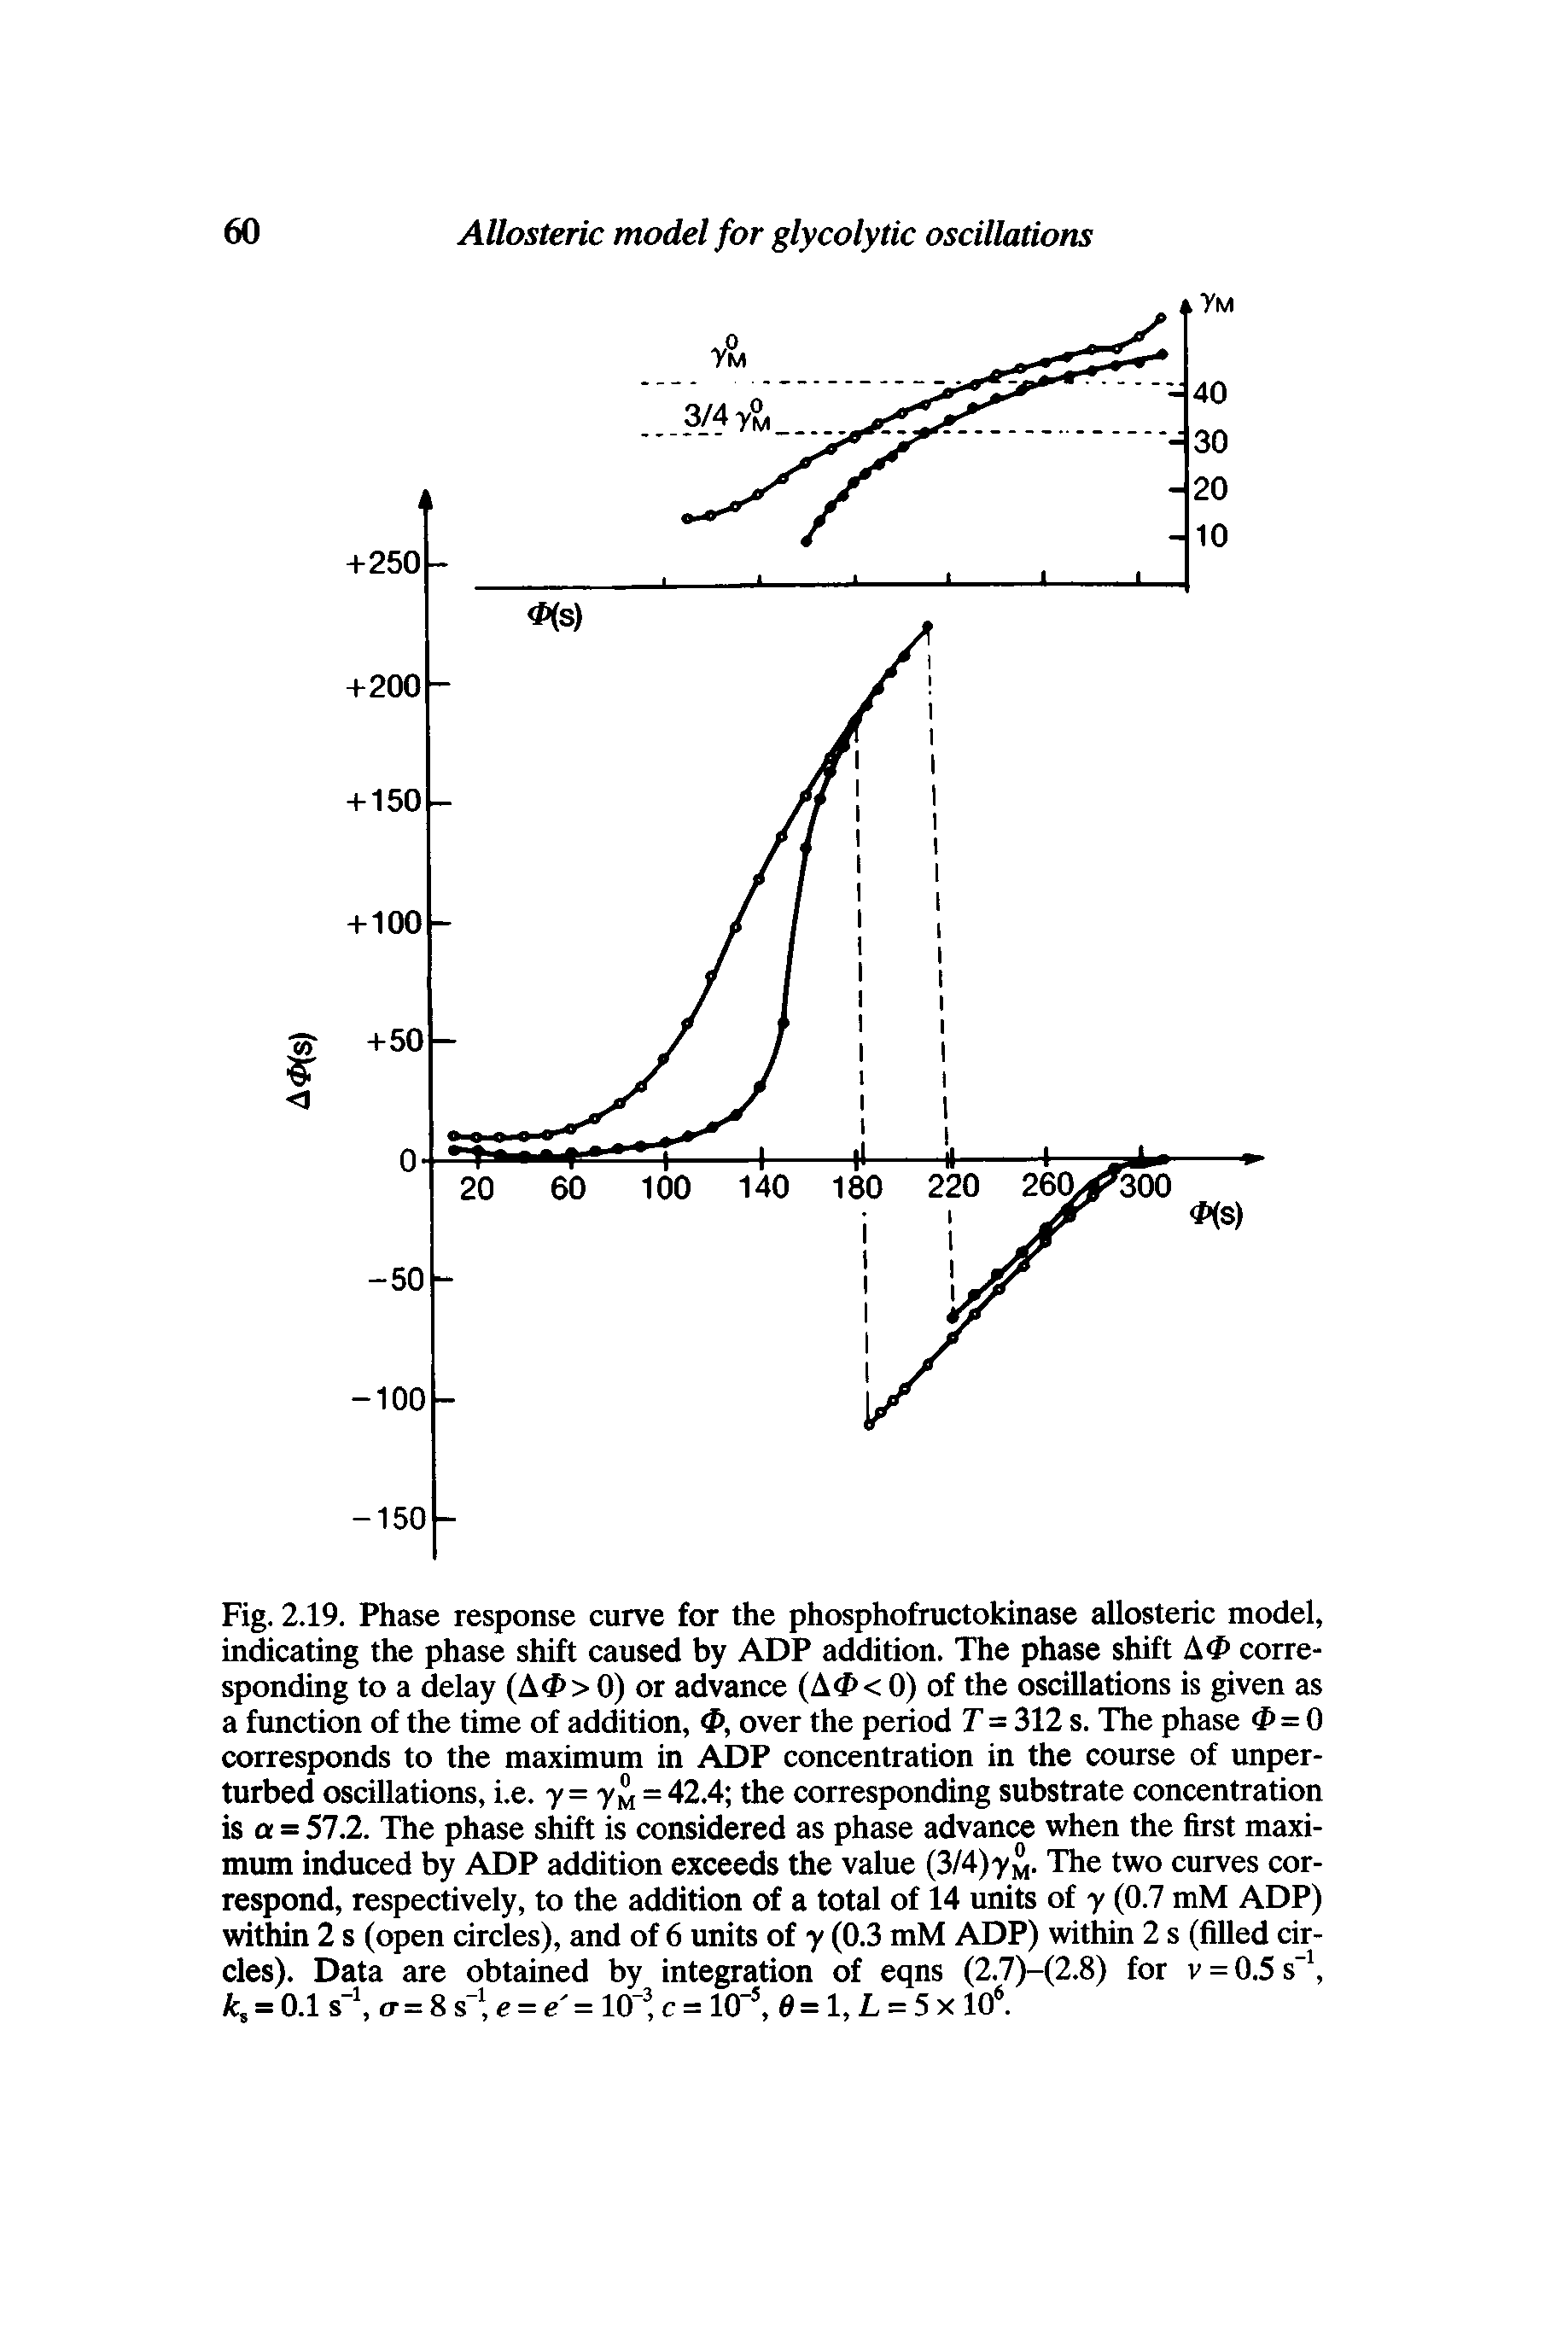 Fig. 2.19. Phase response curve for the phosphofructokinase allosteric model, indicating the phase shift caused by ADP addition. The phase shift A(P corresponding to a delay (A<P> 0) or advance (A<P< 0) of the oscillations is given as a fimction of the time of addition, 4>, over the period T = 312 s. The phase = 0 corresponds to the maximum in ADP concentration in the course of unperturbed oscillations, i.e. y= -/m = 42.4 the corresponding substrate concentration is a = 57.2. The phase shift is considered as phase advance when the first maximum induced by ADP addition exceeds the value (3/4)-yM. The two curves correspond, respectively, to the addition of a total of 14 units of y (0.7 mM ADP) within 2 s (open circles), and of 6 units of y (0.3 mM ADP) within 2 s (filled circles). Data are obtained by integration of eqns (2.7)-(2.8) for v = 0.5 s = 0.1 s ff = 8 s U = e = lOi c = 10 , e = 1, L = 5 X 10. ...